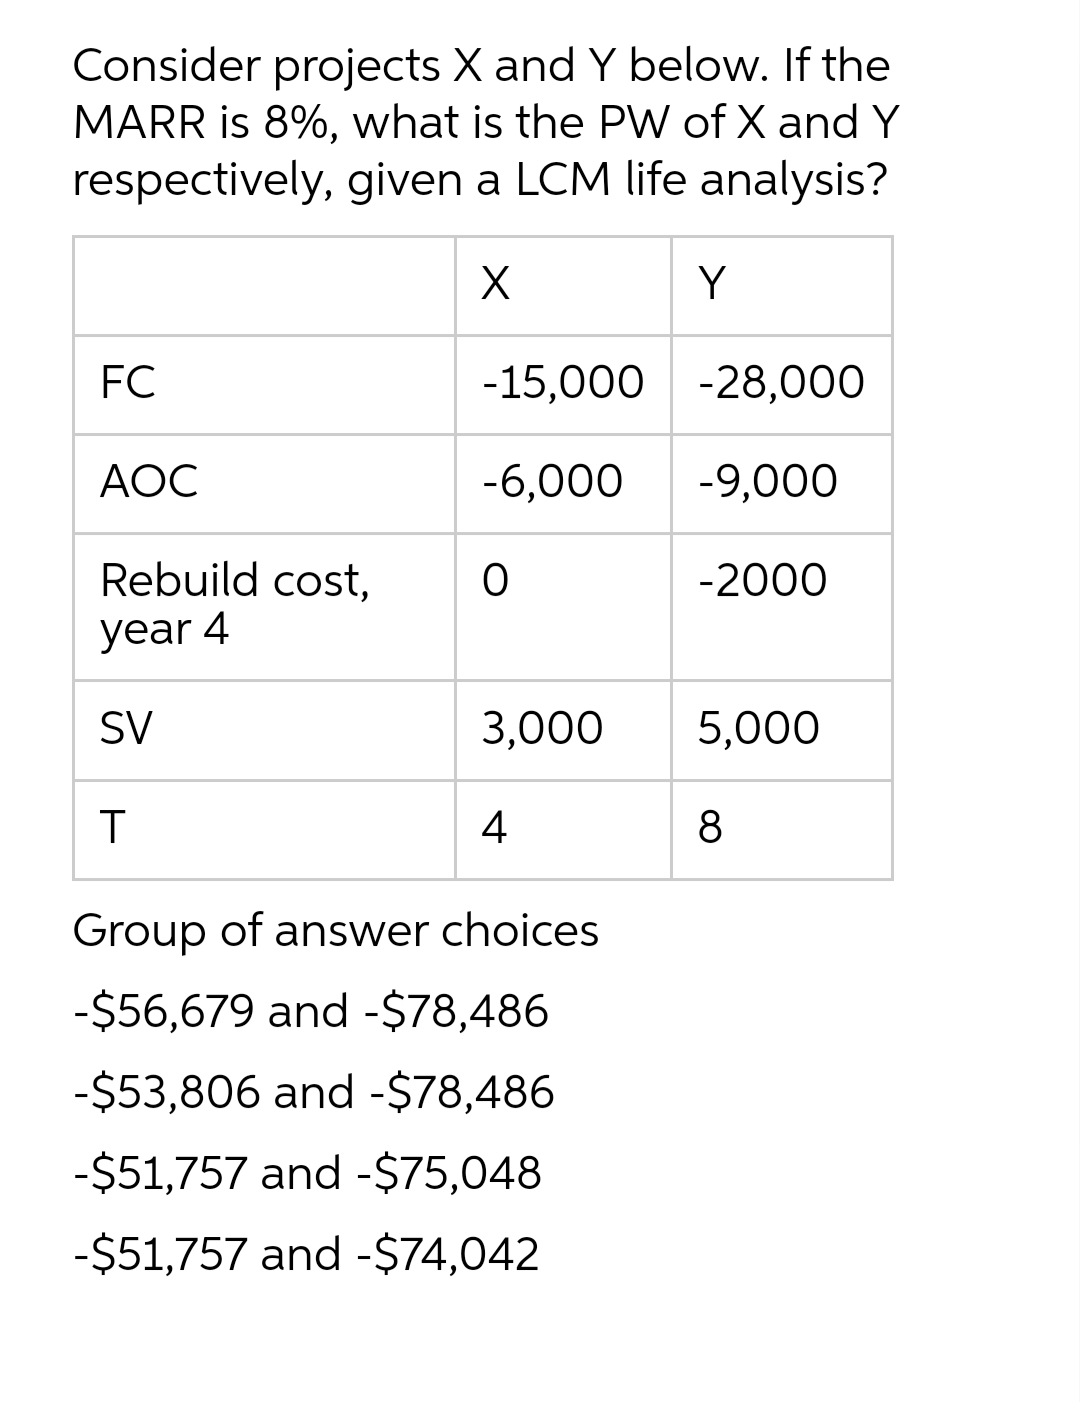 Consider projects X and Y below. If the
MARR is 8%, what is the PW of X and Y
respectively, given a LCM life analysis?
Y
FC
-15,000 -28,000
AOC
-6,000
-9,000
Rebuild cost,
-2000
year 4
SV
3,000
5,000
4
8
Group of answer choices
-$56,679 and -$78,486
-$53,806 and -$78,486
-$51,757 and -$75,048
-$51,757 and -$74,042
